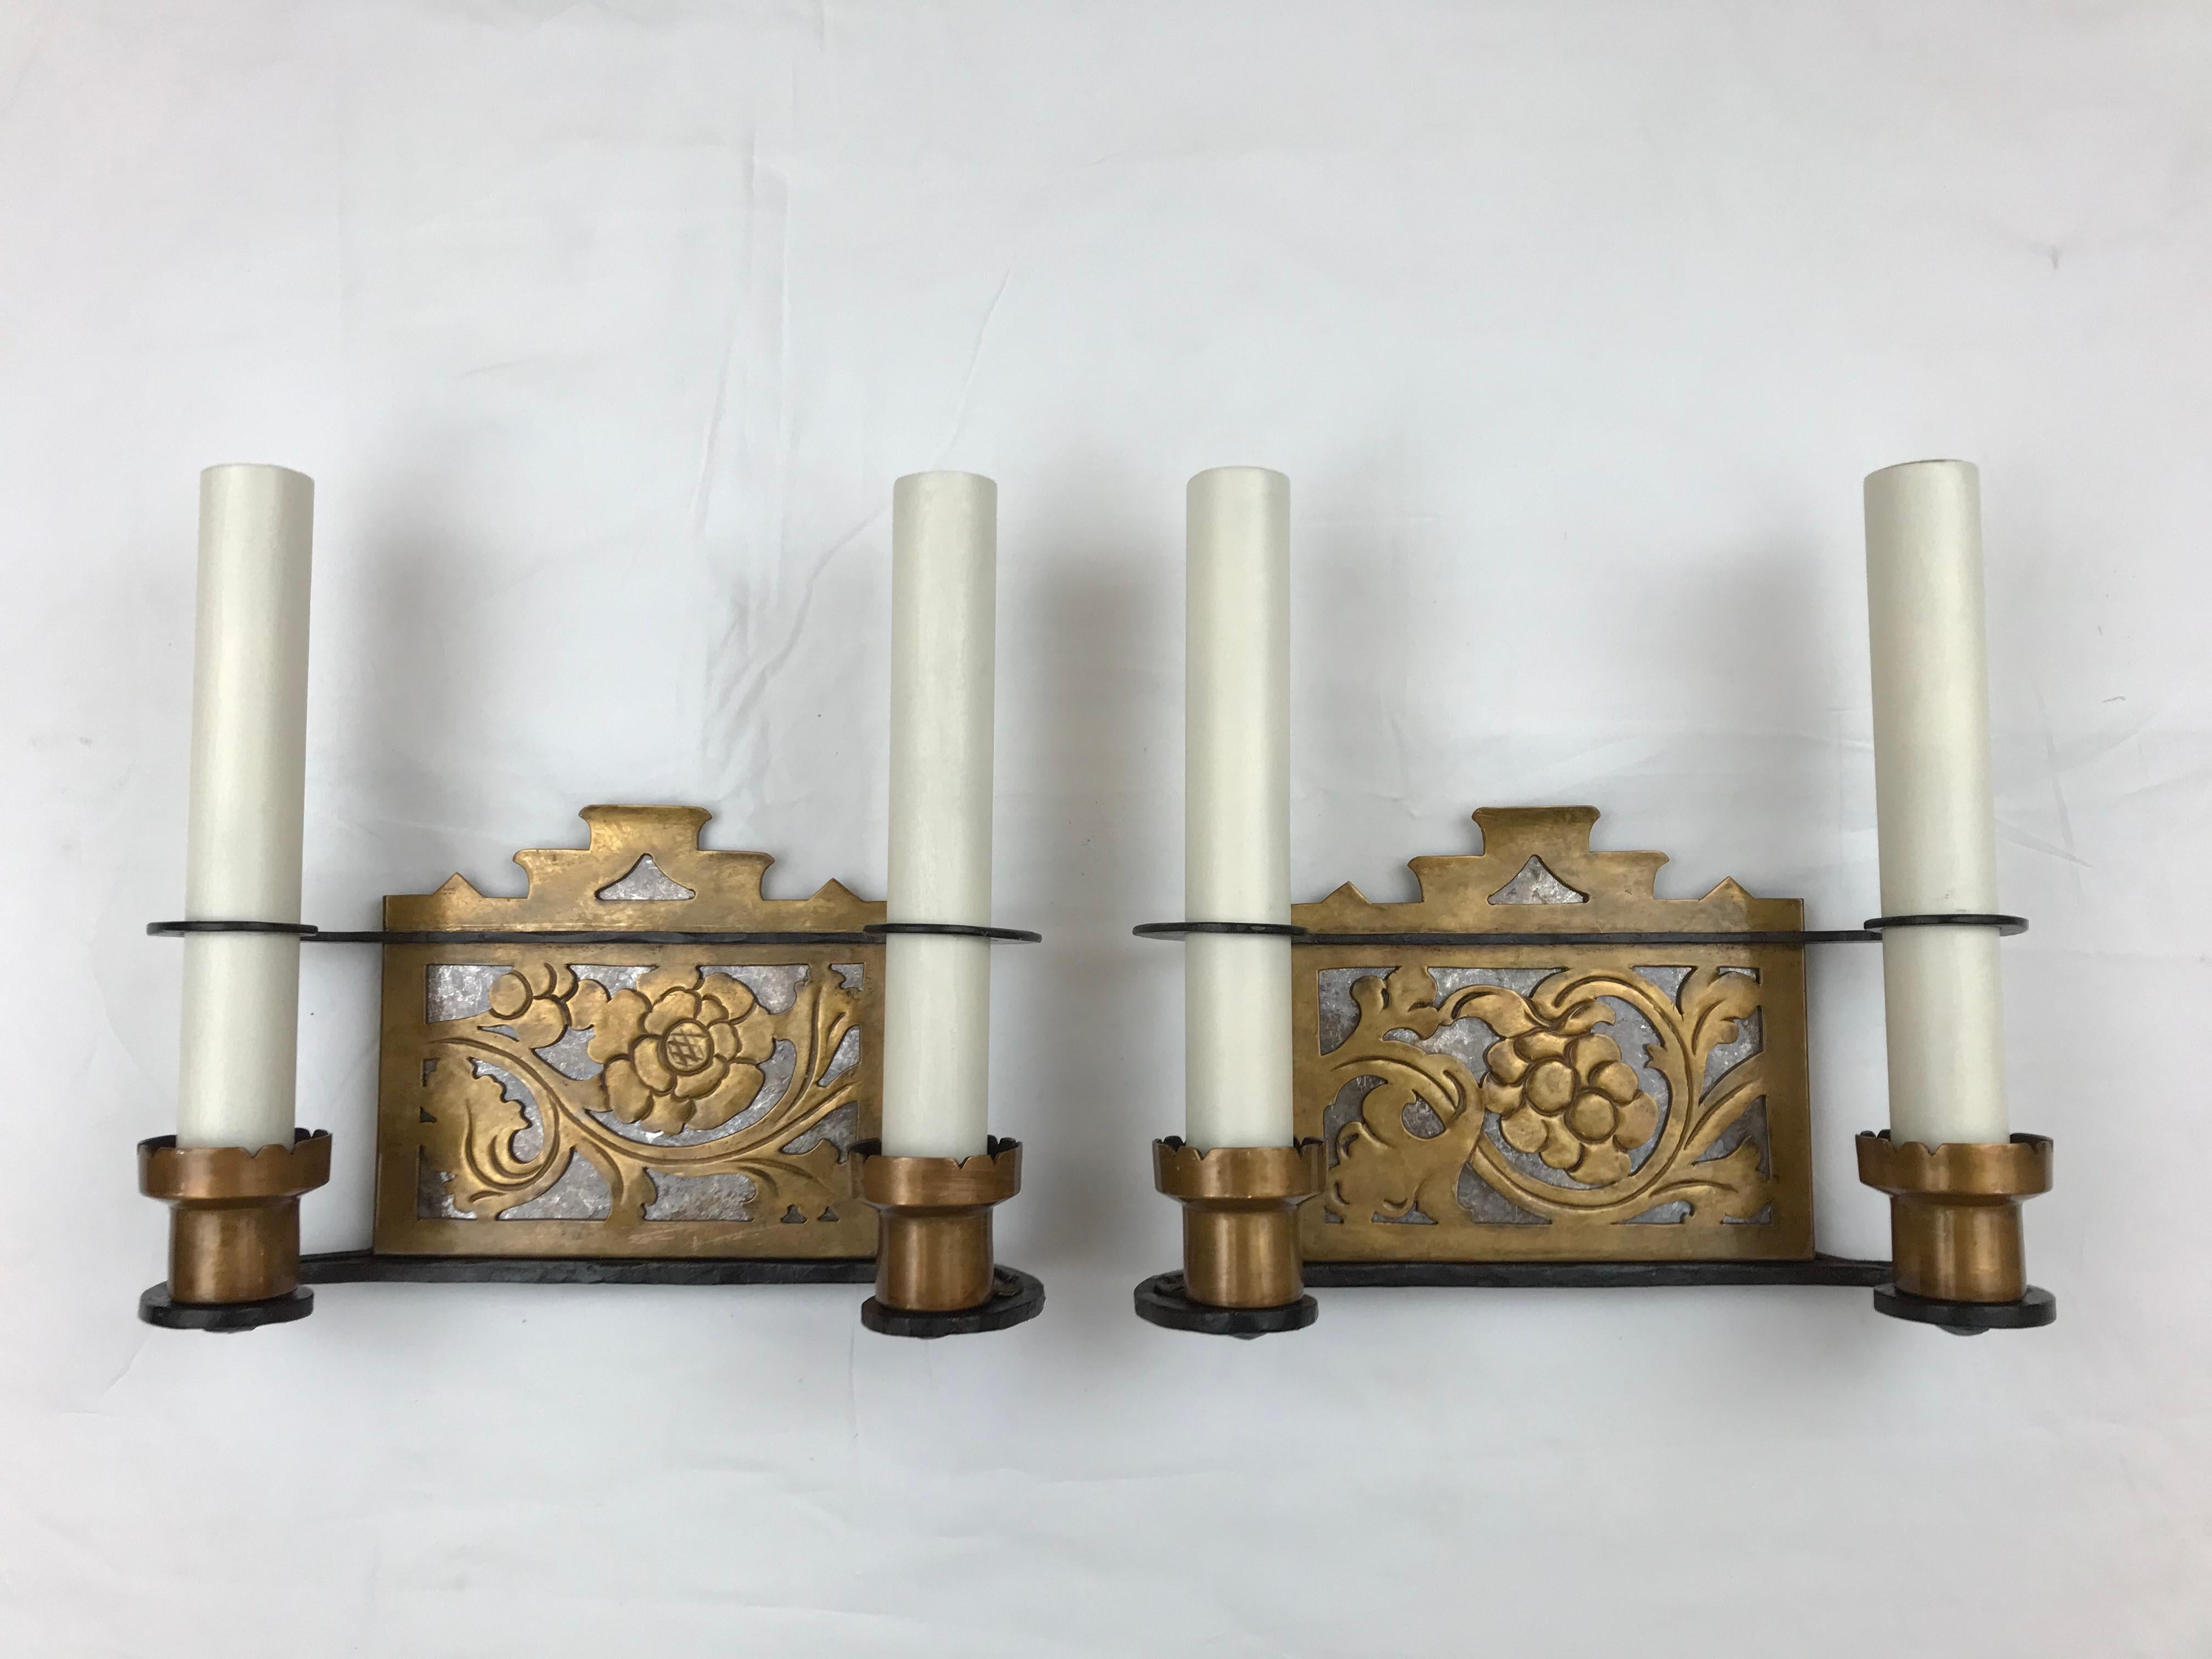 This high style pair of Arts and Crafts sconces are hand made of wrought iron and bronze with mica backs.  They are attributed to Oscar Bach, the renown Arts and Crafts designer and manufacturer of metalware.